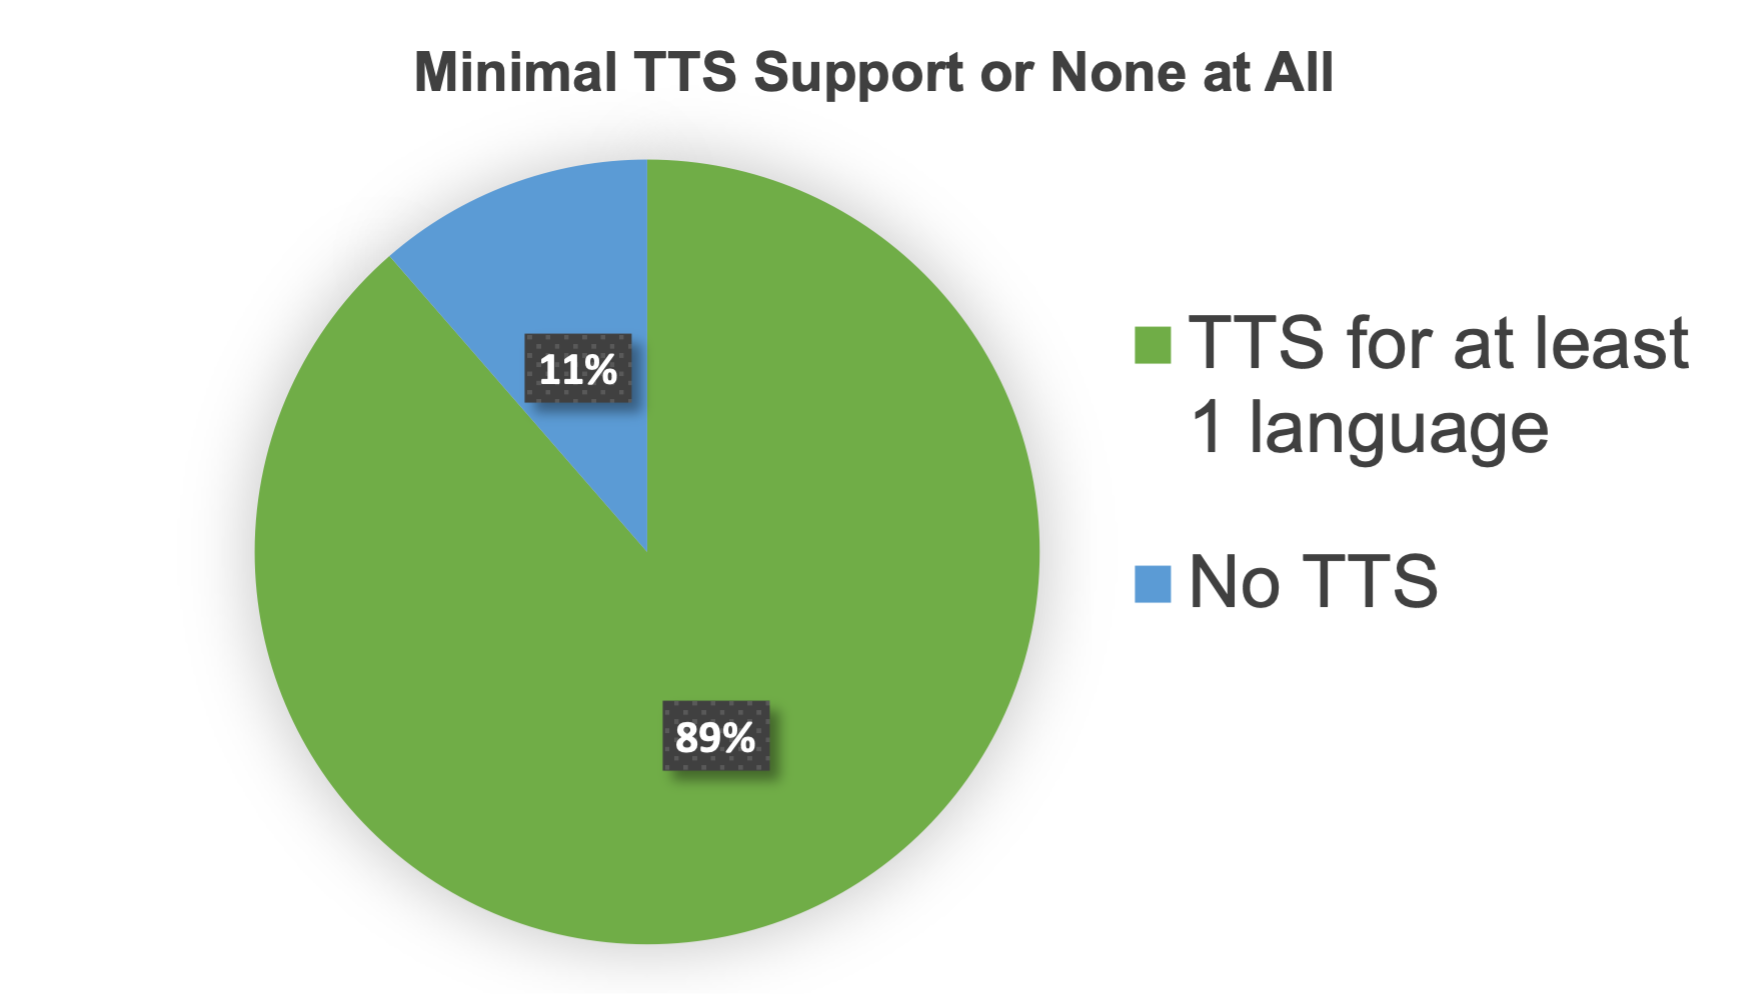 Minimal TTS support one available